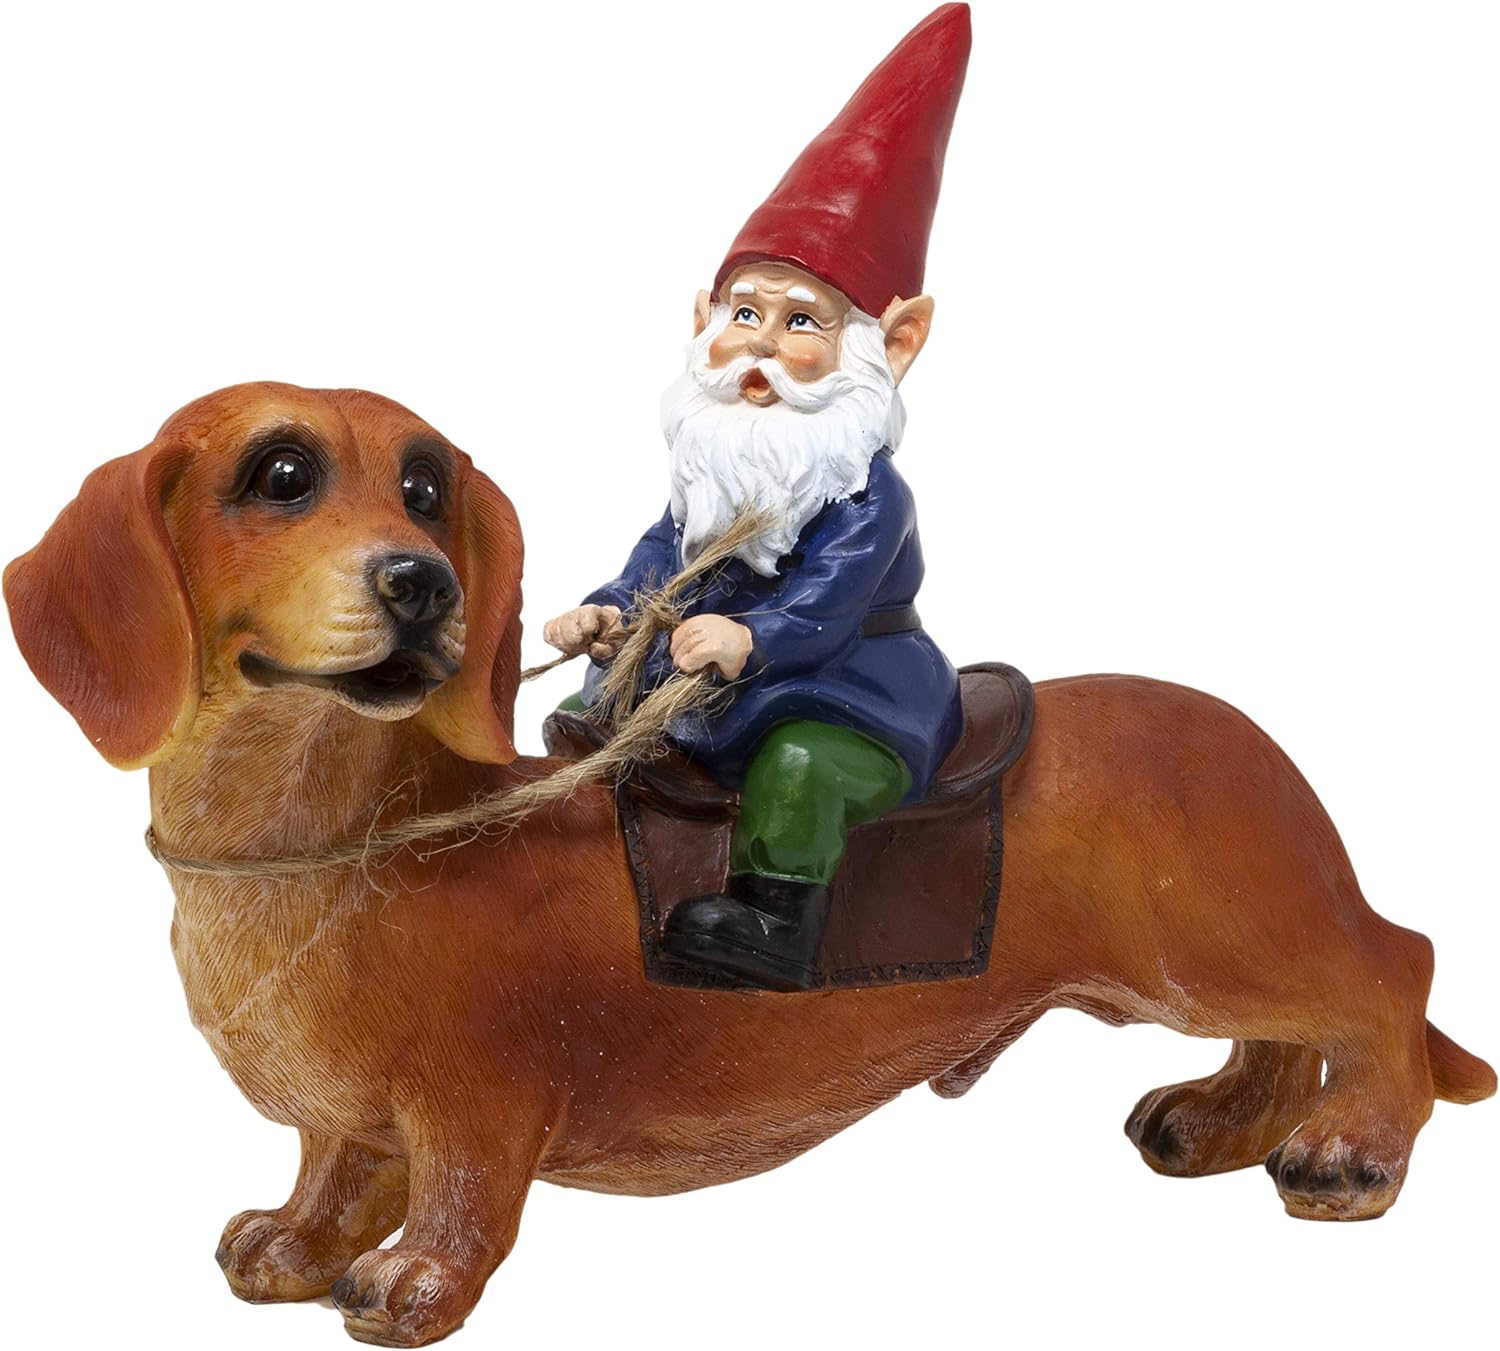 Gnome and a Dachshund Garden Gnome Statue- Indoor/Outdoor Garden Gnome Sculpture for Patio, Yard or Lawn